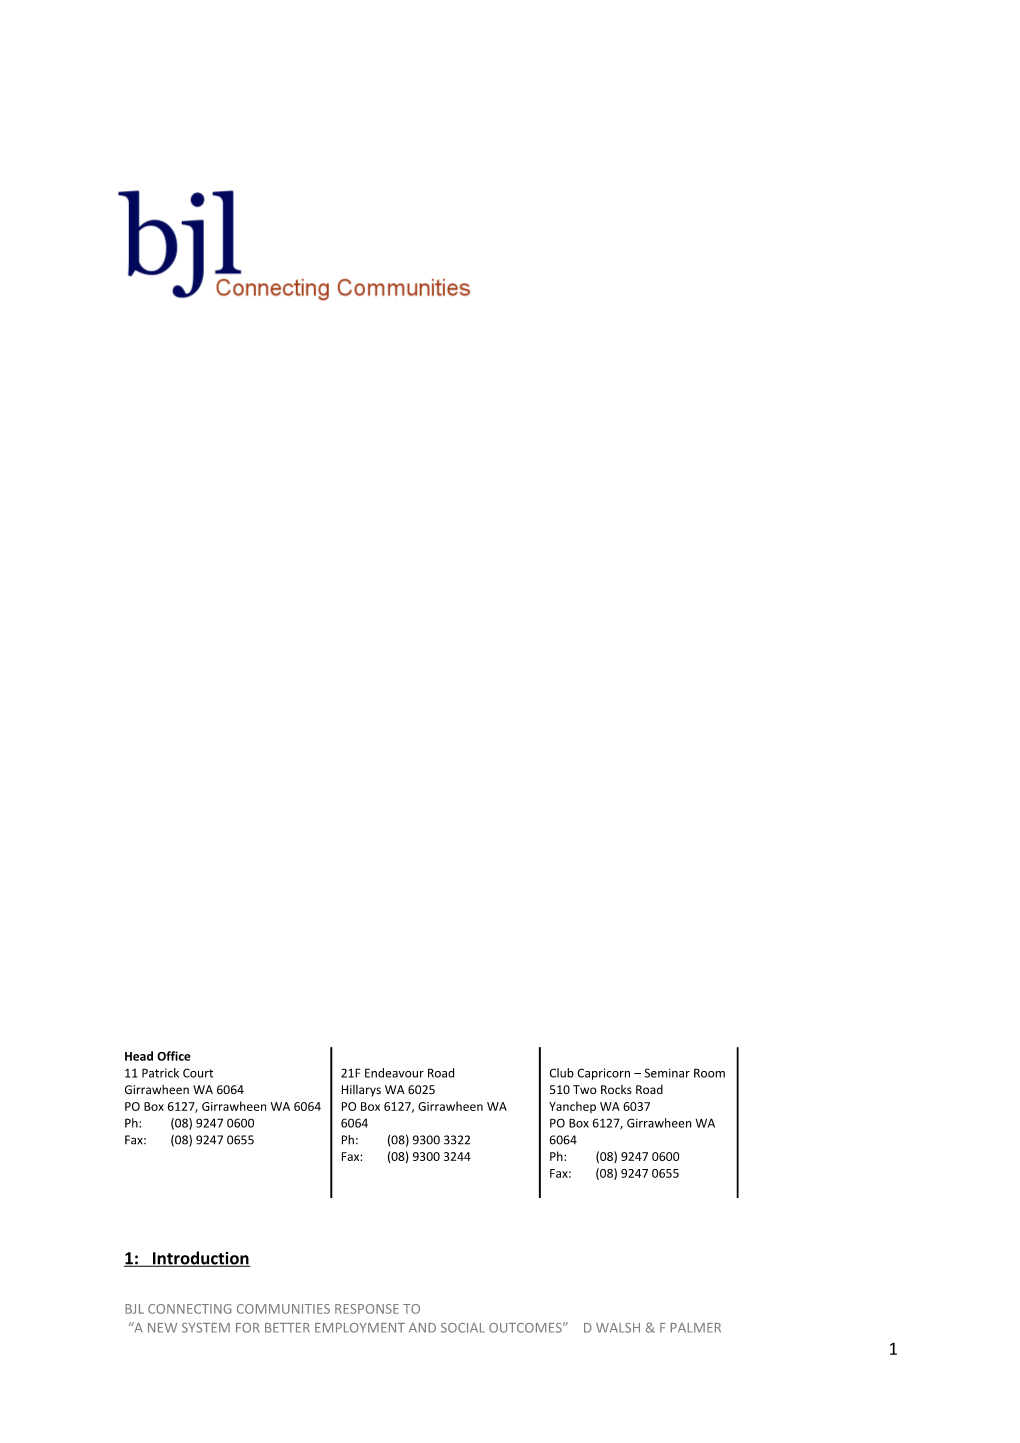 BJL Connecting Communities (BJL) Welcomes the Opportunity to Make a Submission to the Department